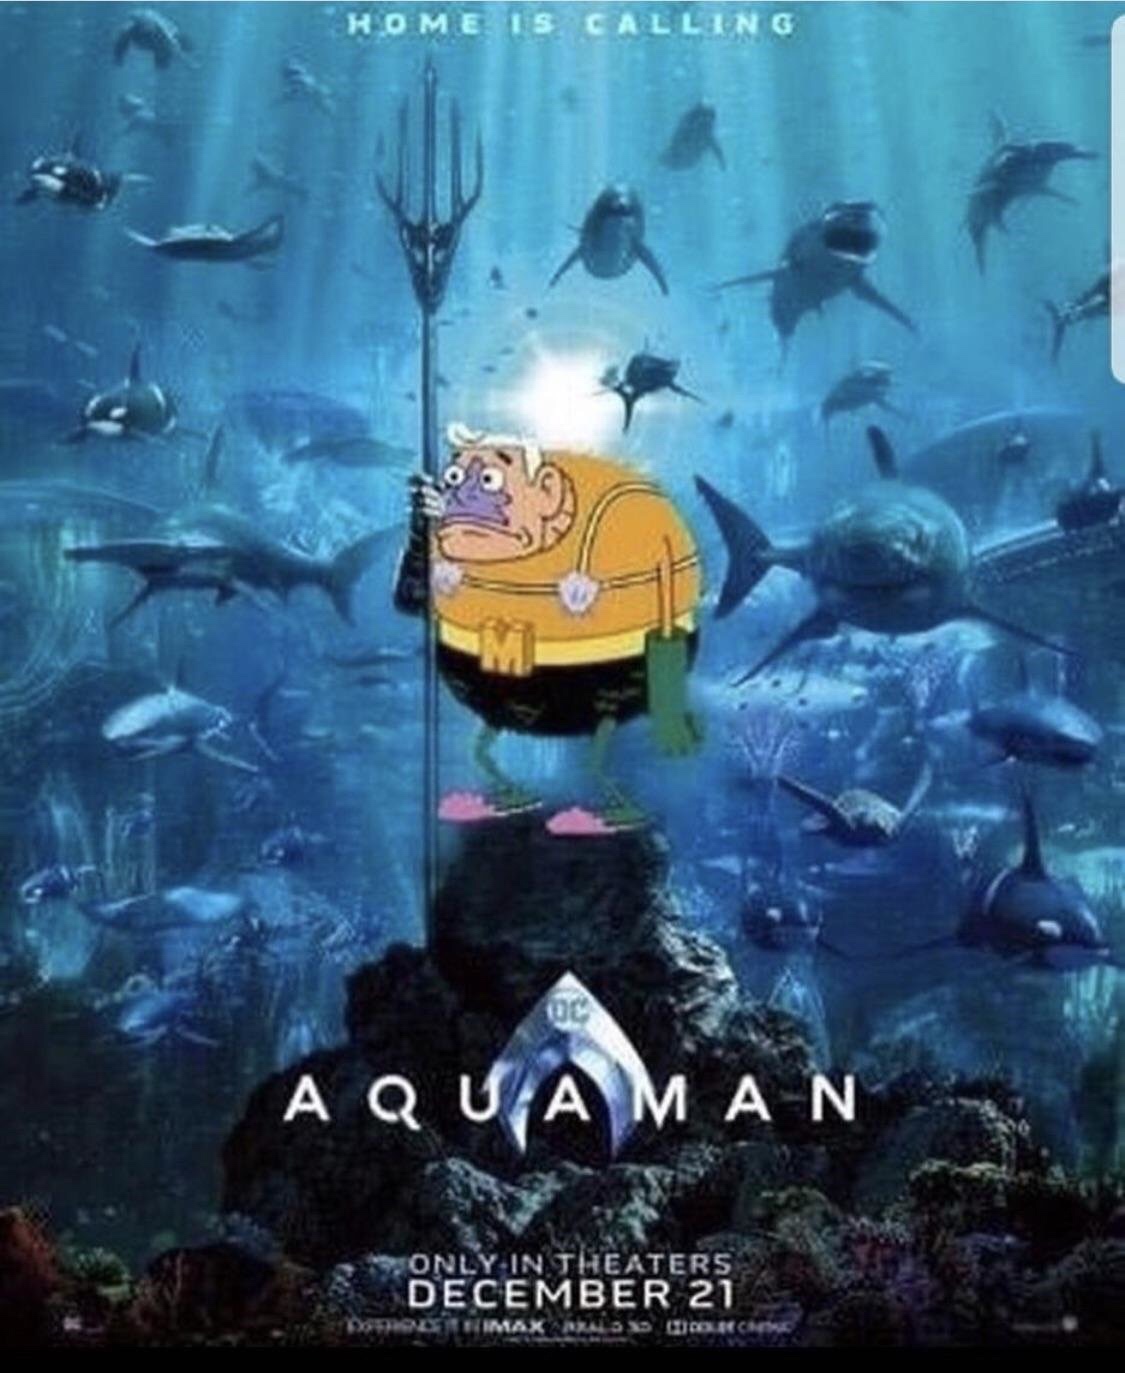 funny meme about mermaid man movie - Home Is Calling Aquaman Only In Theaters December 21 Nemax Ar A Ss Colecc